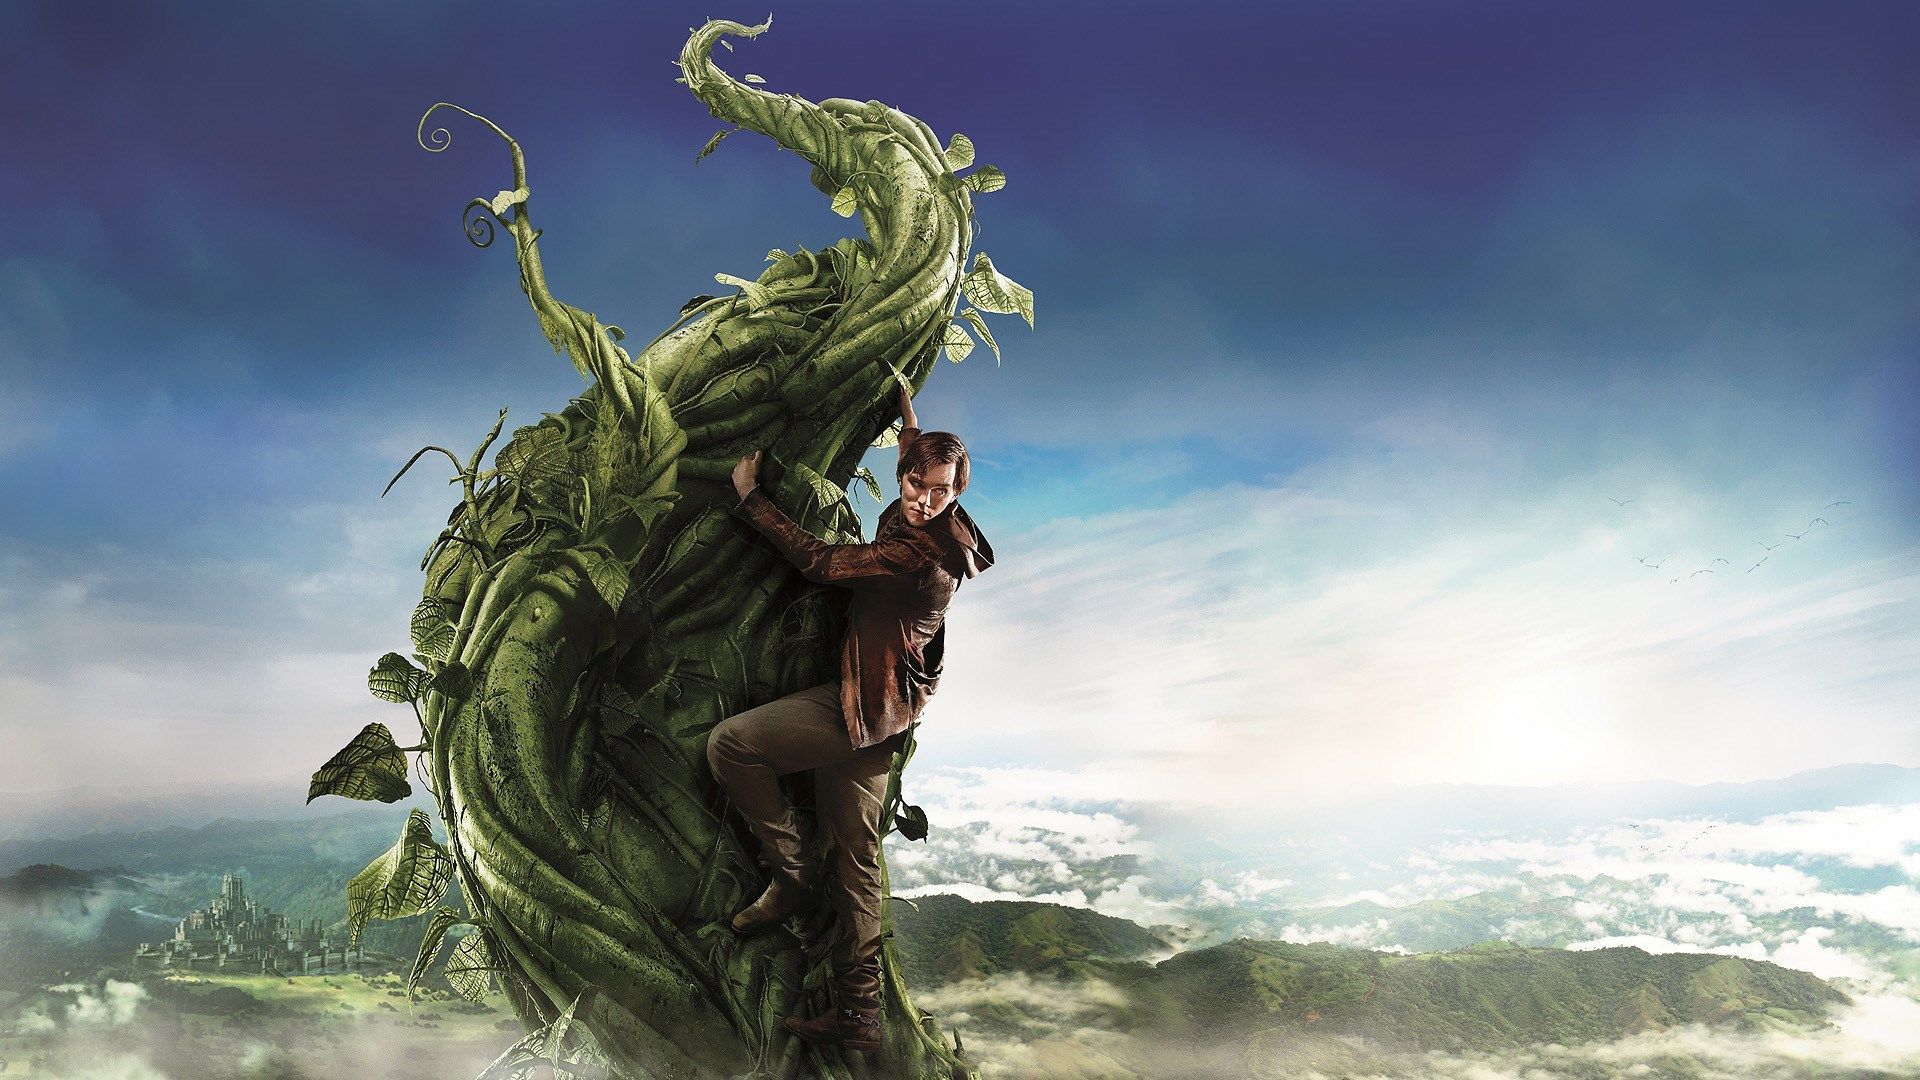 free screensaver wallpaper for jack the giant slayer. Jack and the beanstalk, Jack the giant slayer, Animated movies